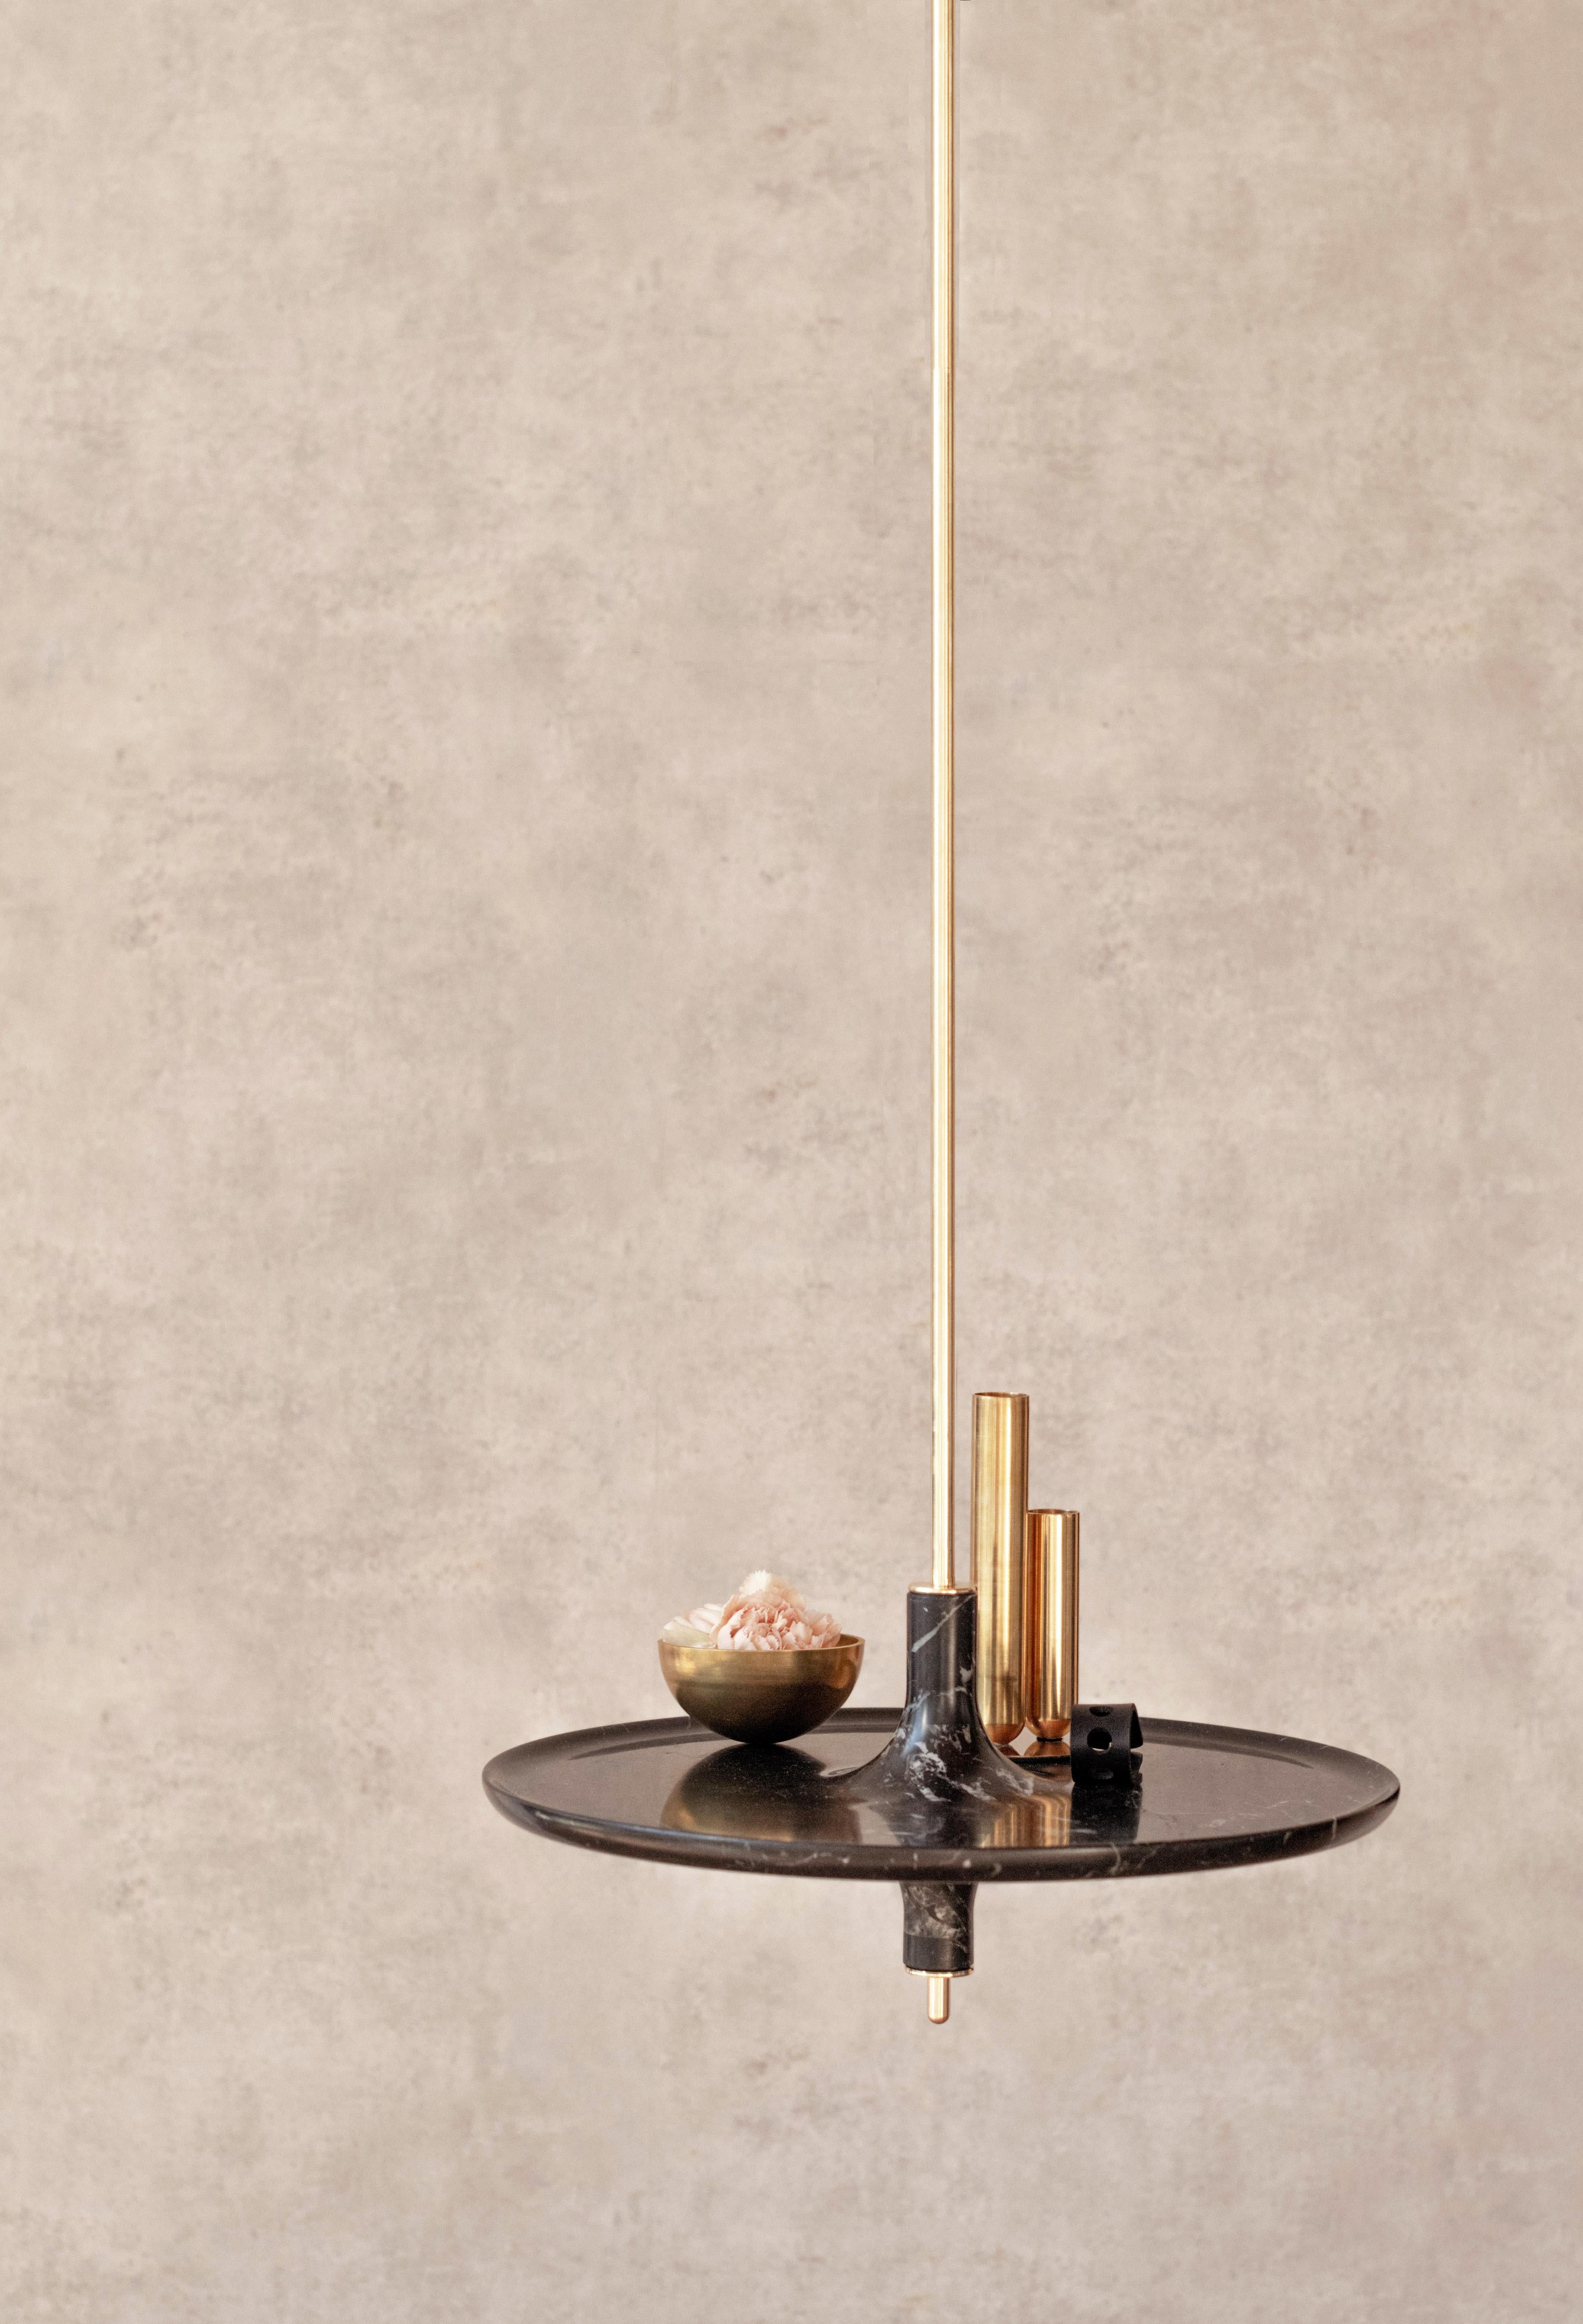 Toupy Black Marble and Brass 38 Hanging Table by Mademoiselle Jo
Dimensions: Ø 38 x H 150 cm.
Materials: Nero Marquina marble and black metal.

Available in four wood colors, three marble options, two bar versions and several diameters. Please